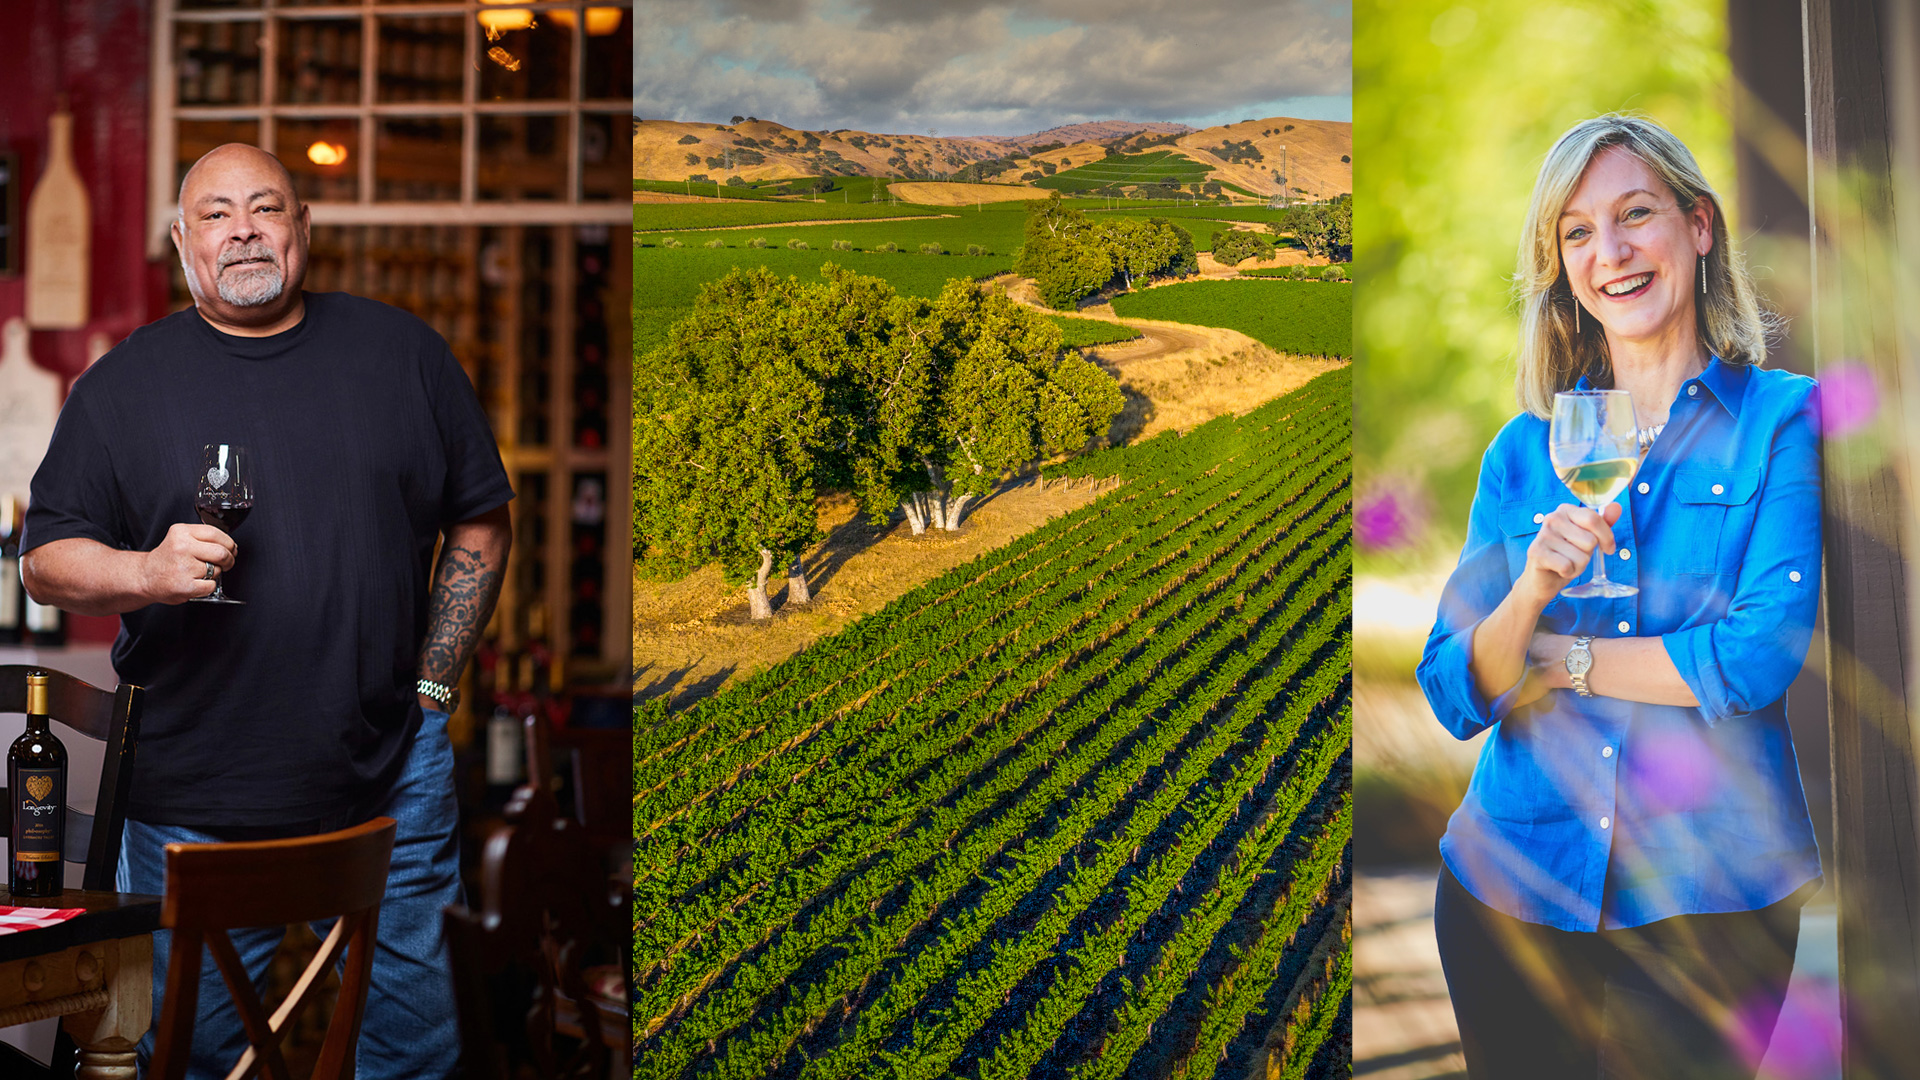 NOLADrinks Show – Livermore Valley Wine – Jul20Ep2 – Phil Long, owner/winemaker of Longevity Wines and President of the Association of African American Vintners and Executive Director of the Livermore Valley Winegrowers Association, Chris Chandler.